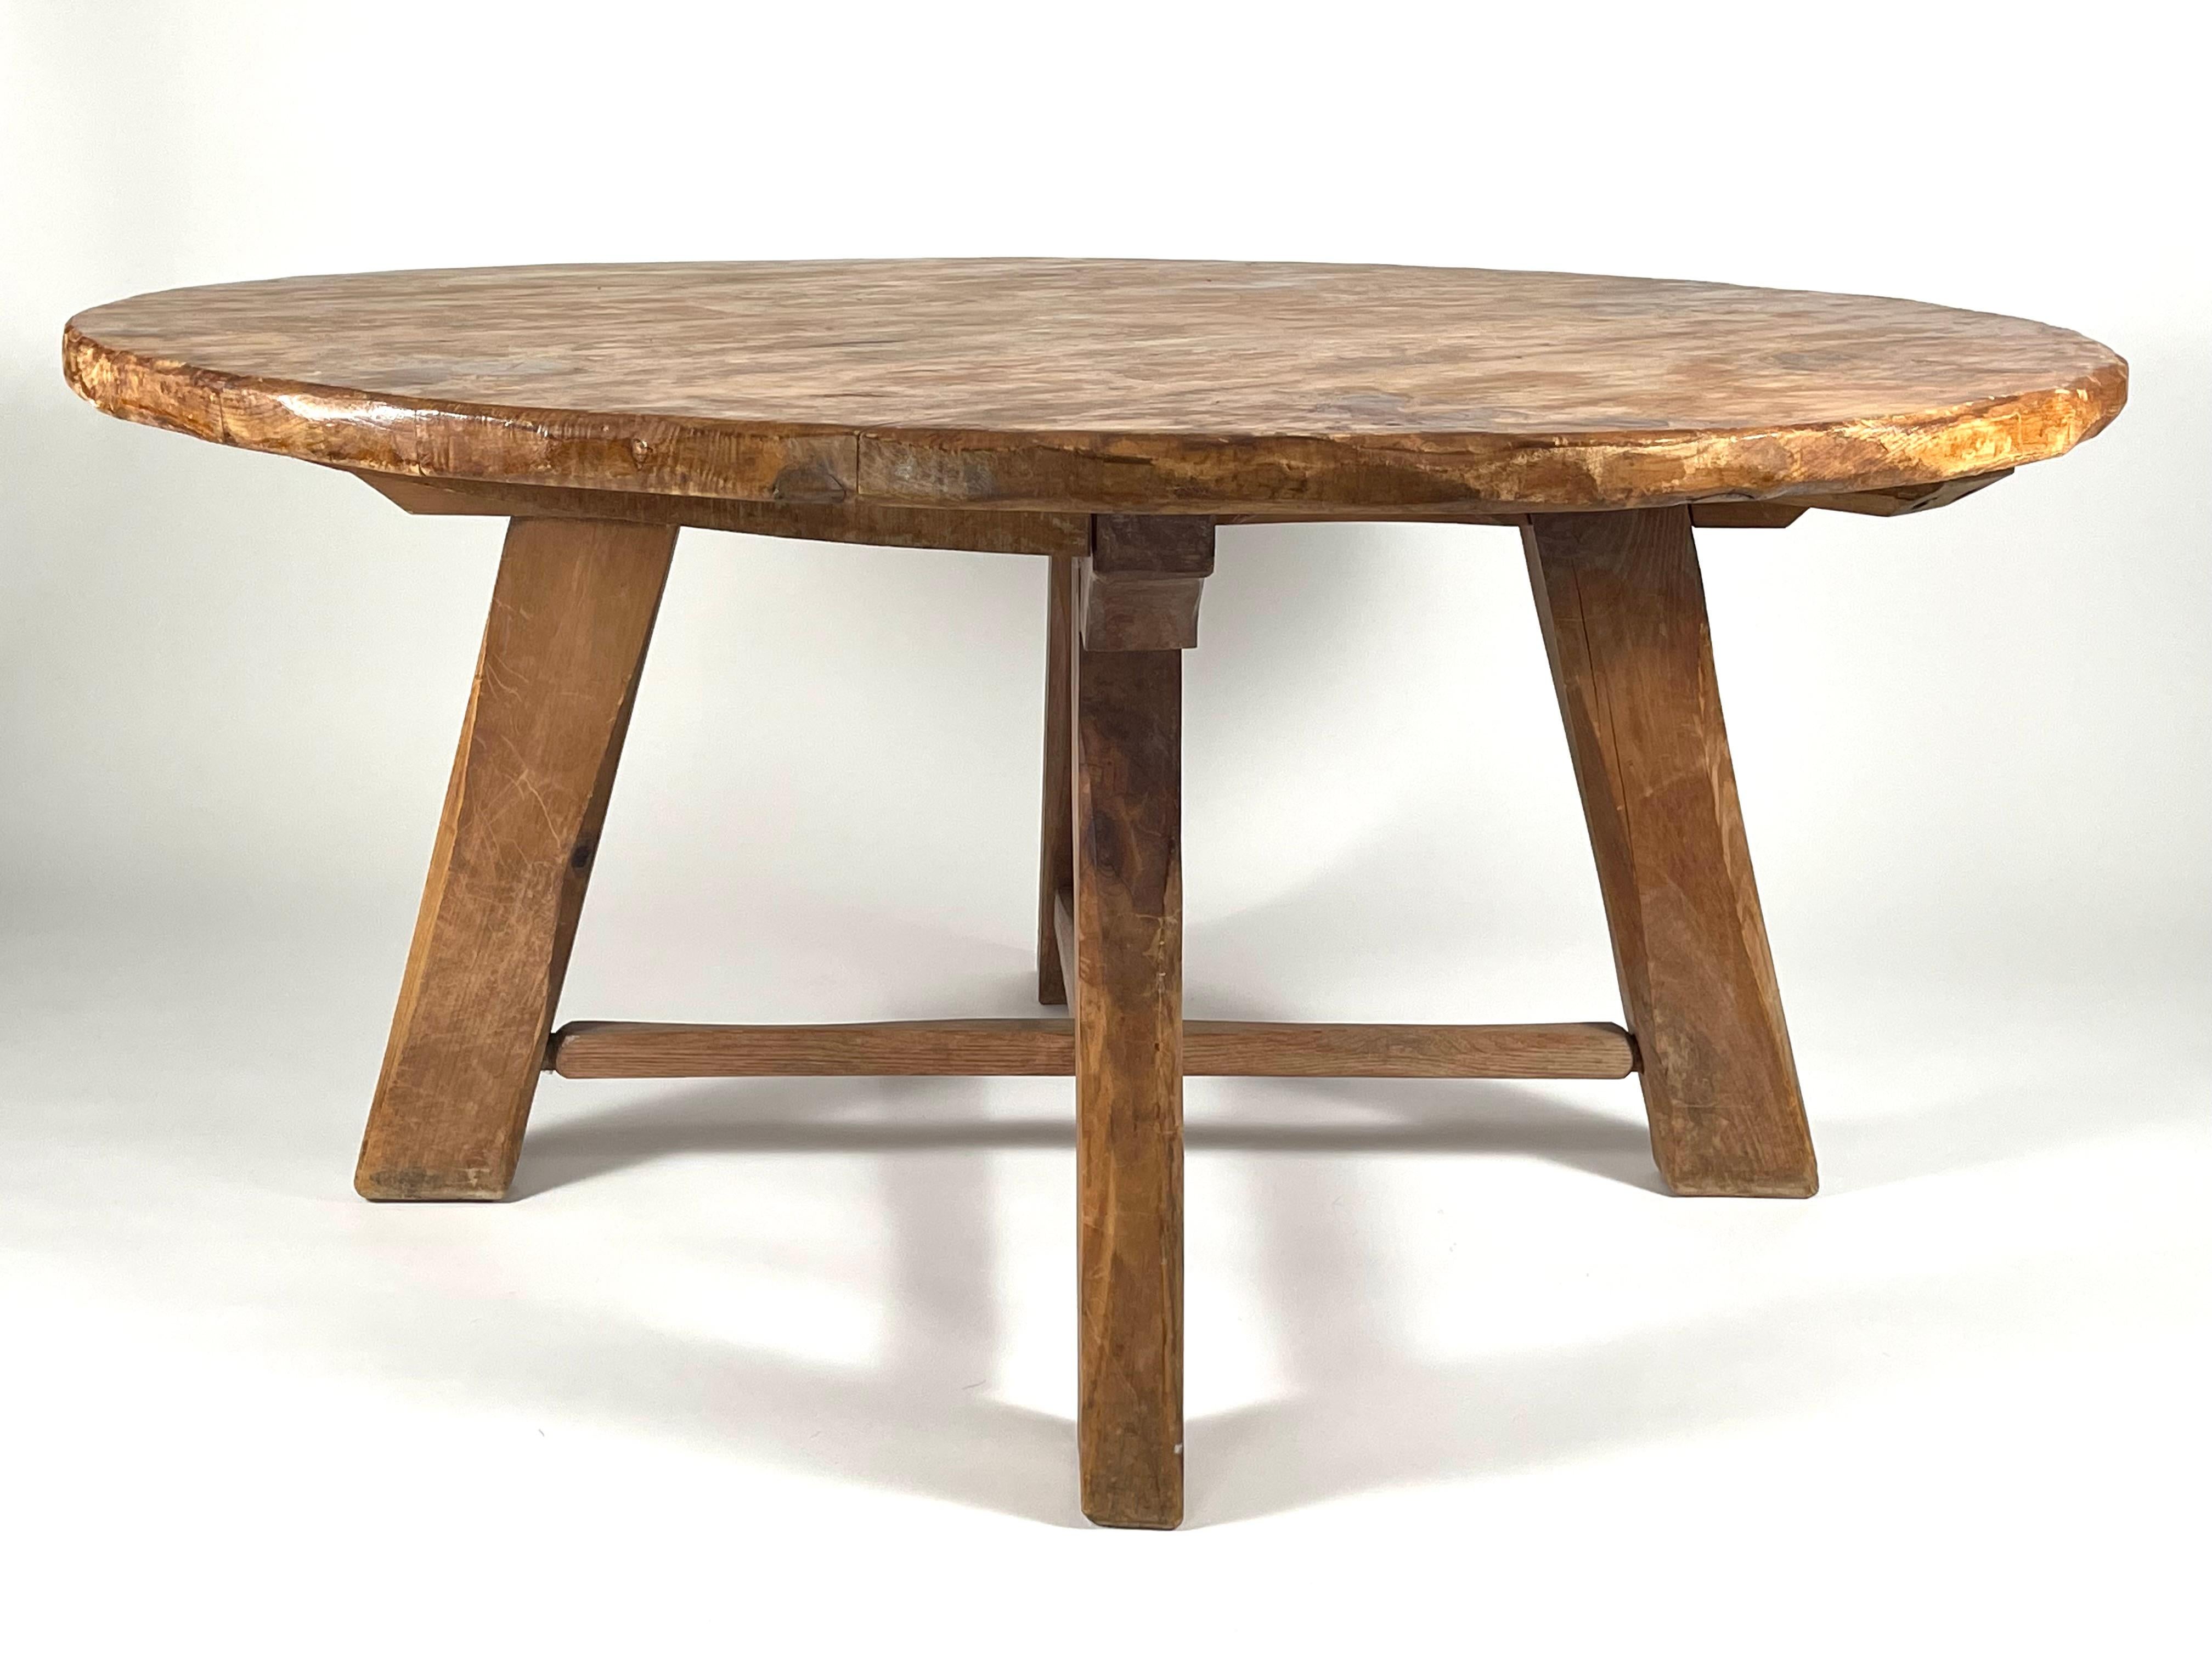 20th Century Rustic Carved Pine Round Dining Table